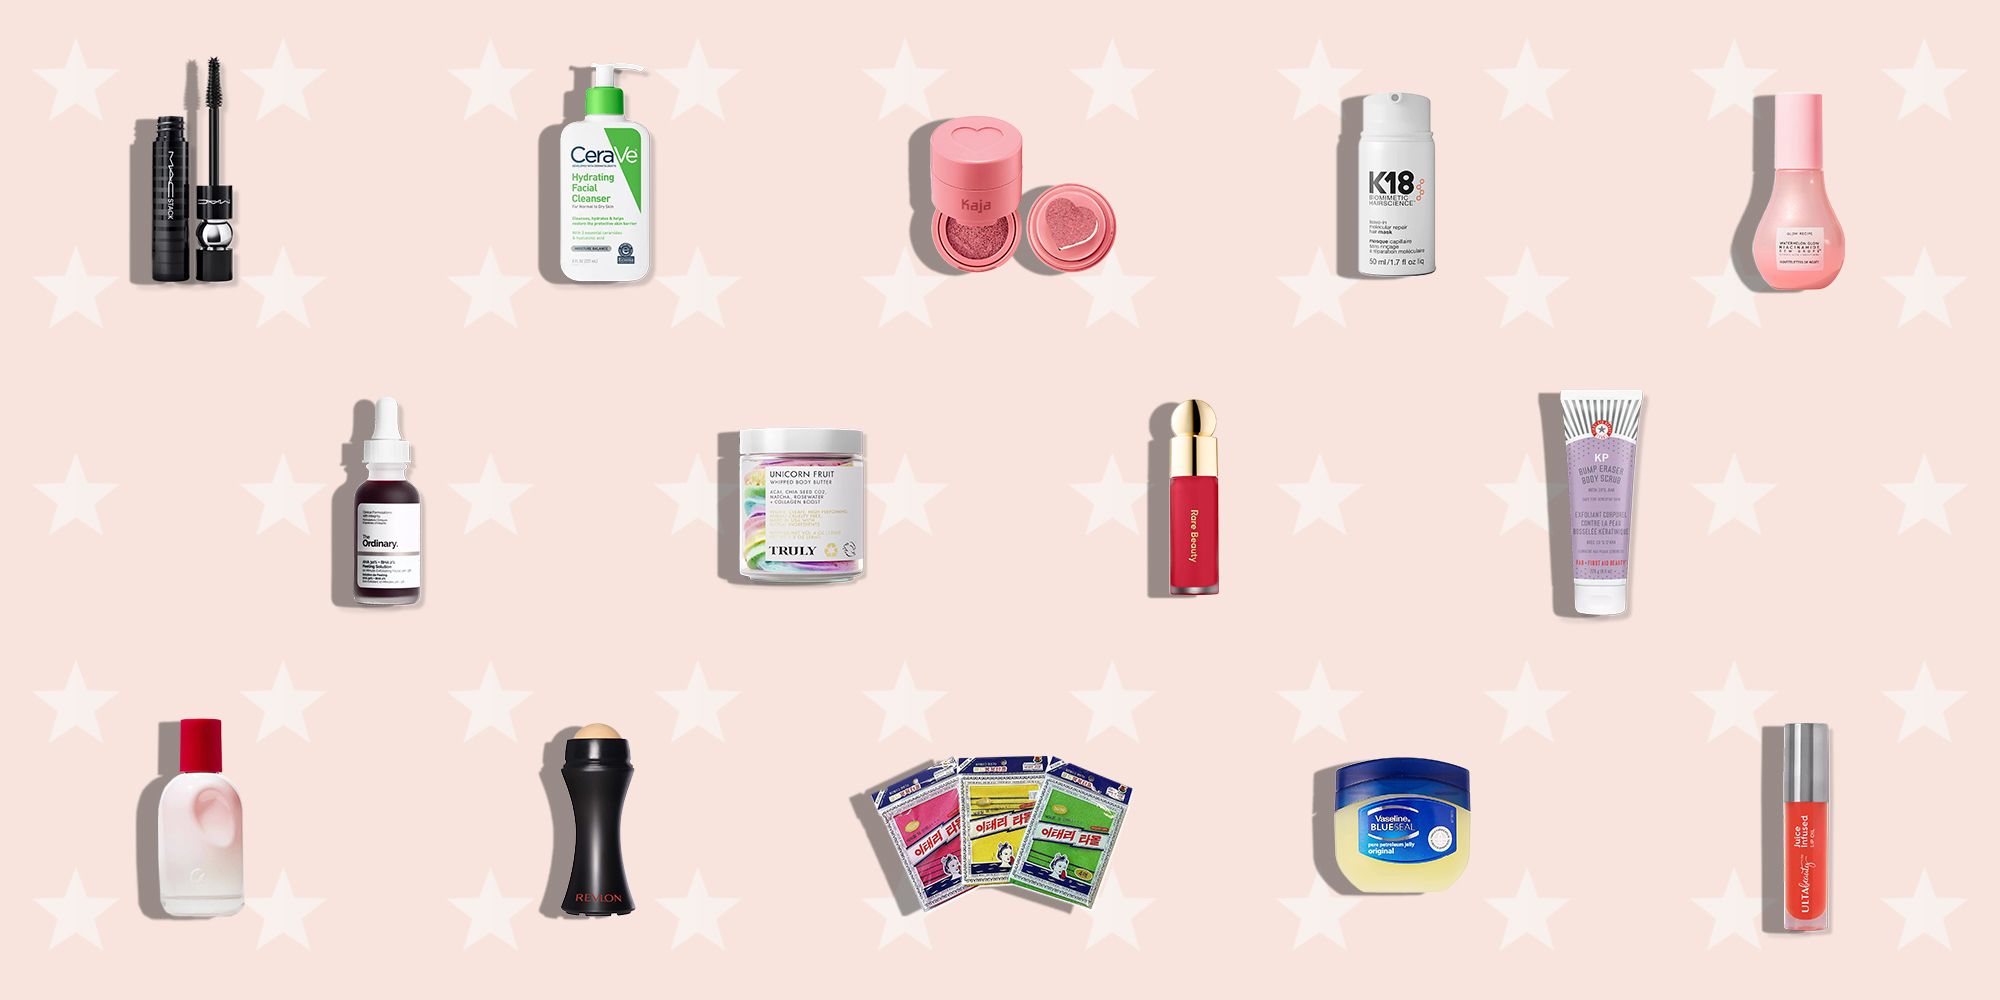 8 Viral TikTok Beauty Products That Are On Sale Now